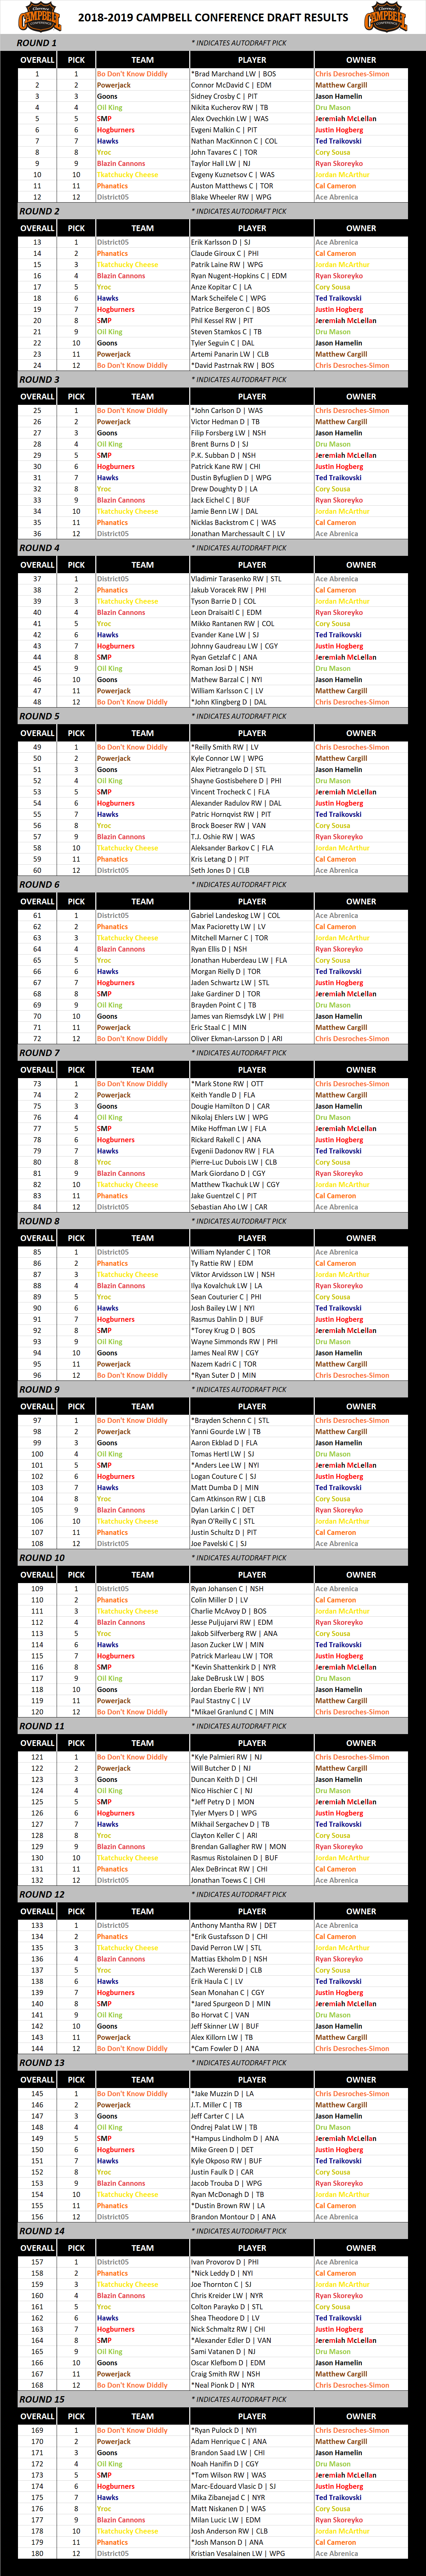 2018-2019 Campbell Conference Draft Results